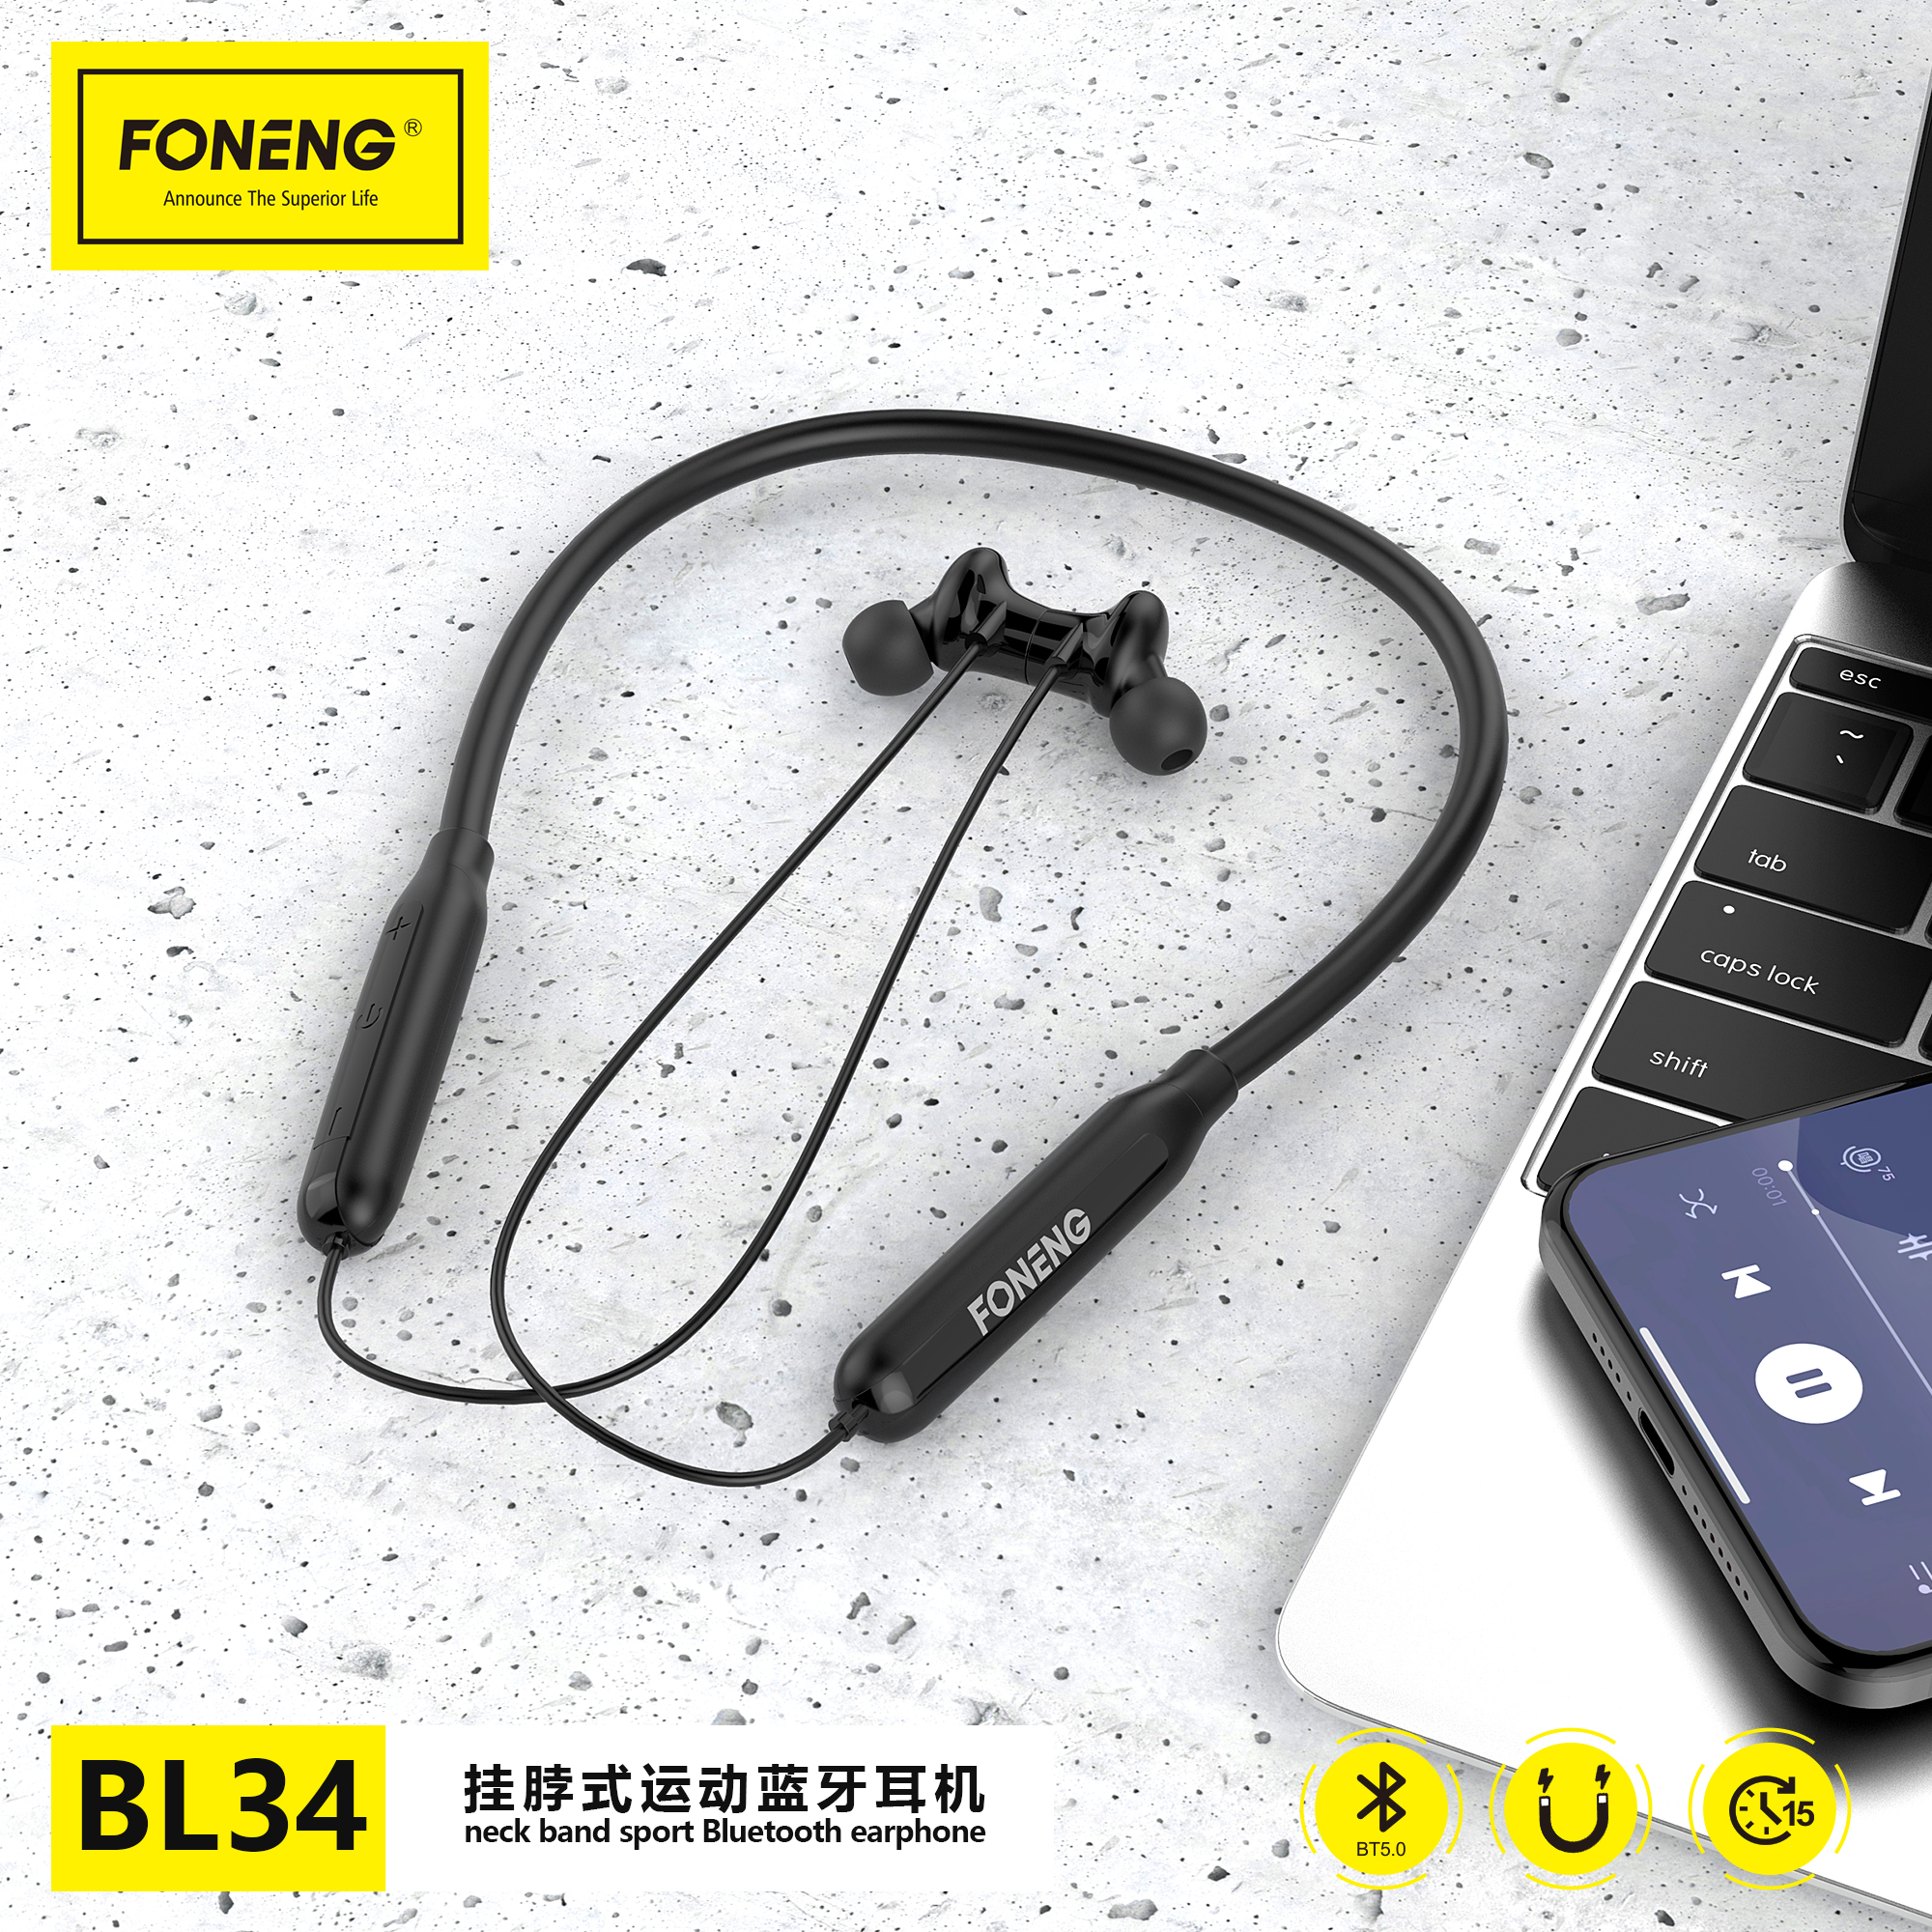 BL34 Neckband Bluetooth Earphone Featured Image